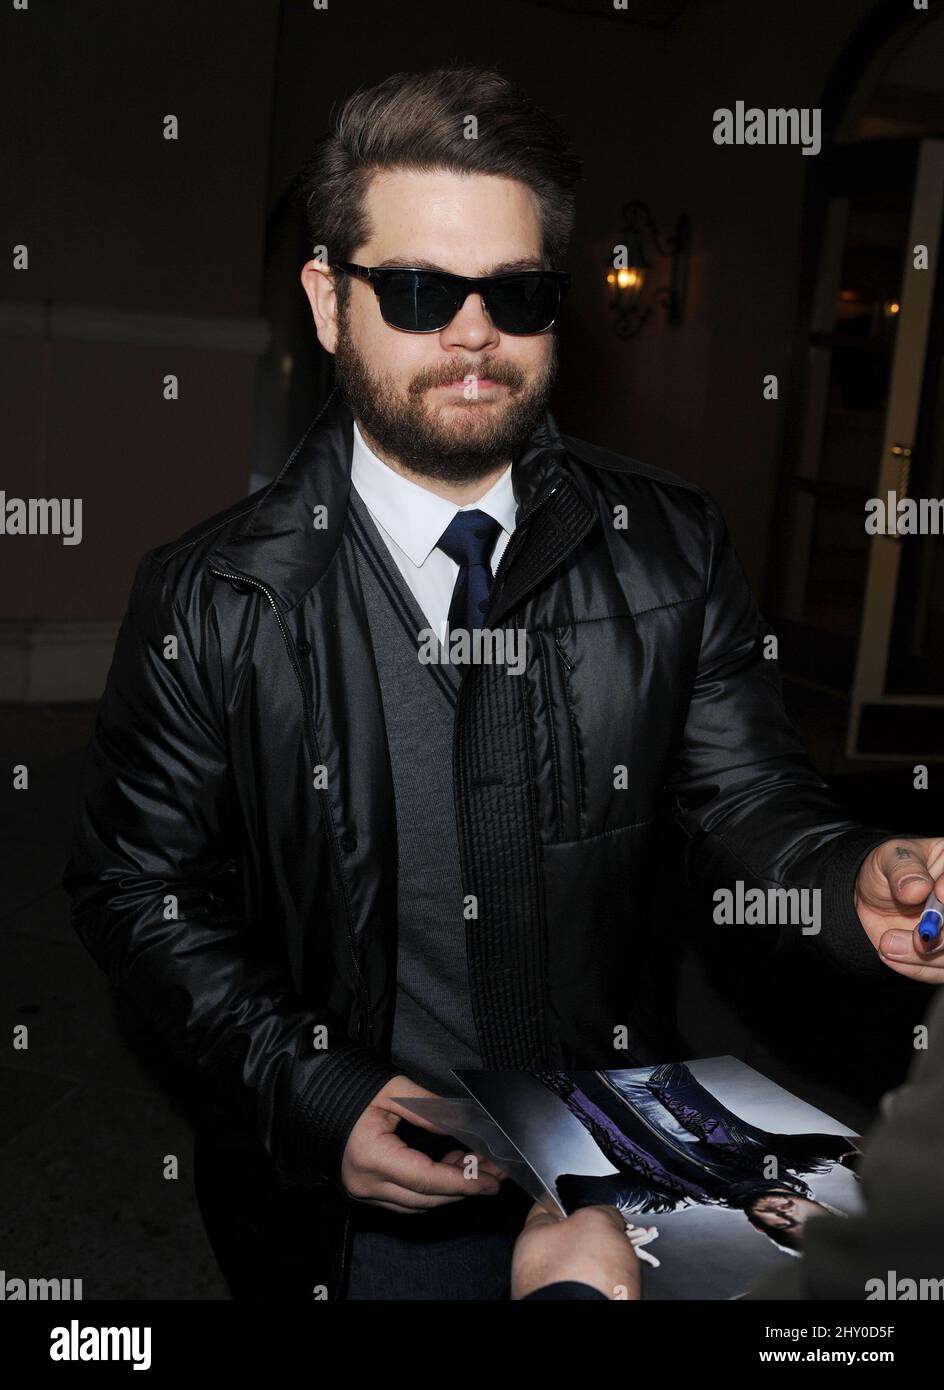 Jack Osbourne attending the 2013 Winter TCA Tour Day 1 held at the Langham Hotel in Pasadena in California, USA. Stock Photo